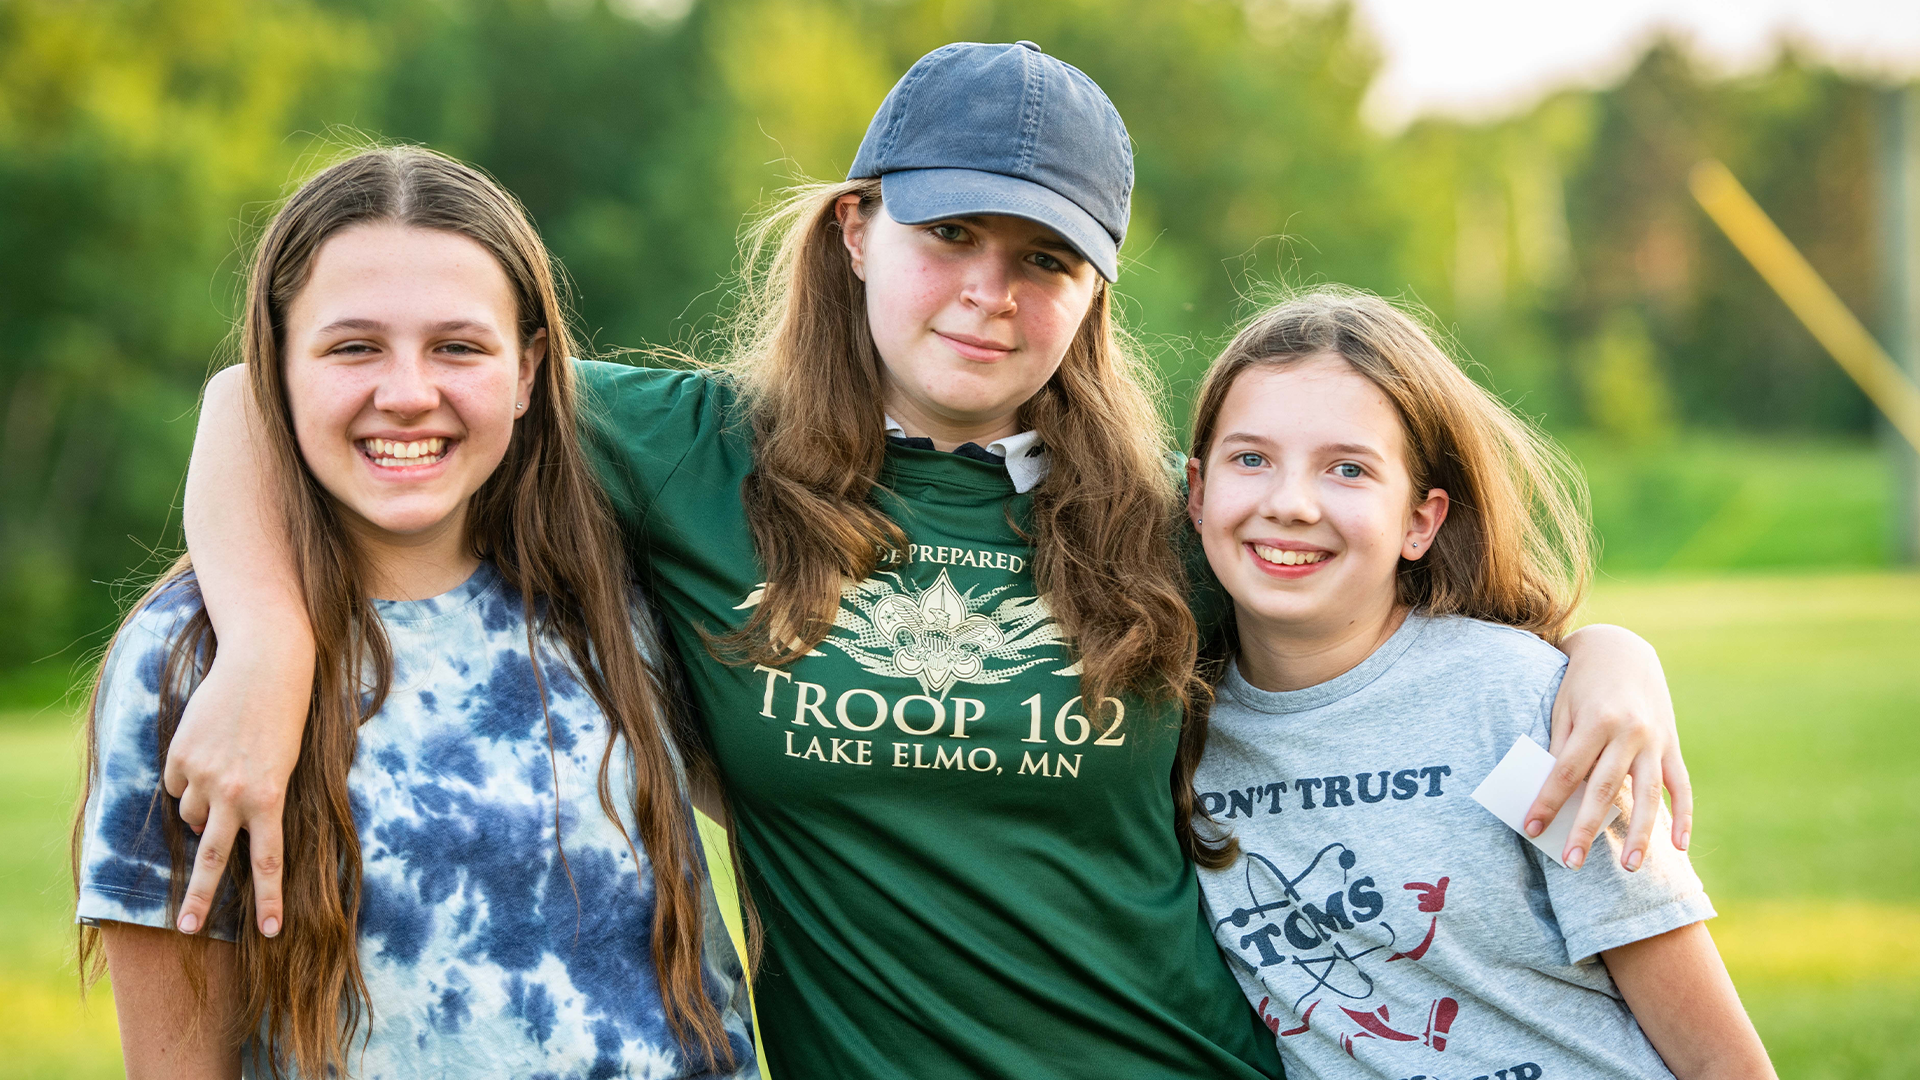 Three girls are smiling with their arms around each other while in the outdoors. The girl in the middle is wearing a shirt that say "Be Prepared - Troop 162 of Lake Elmo, MN".